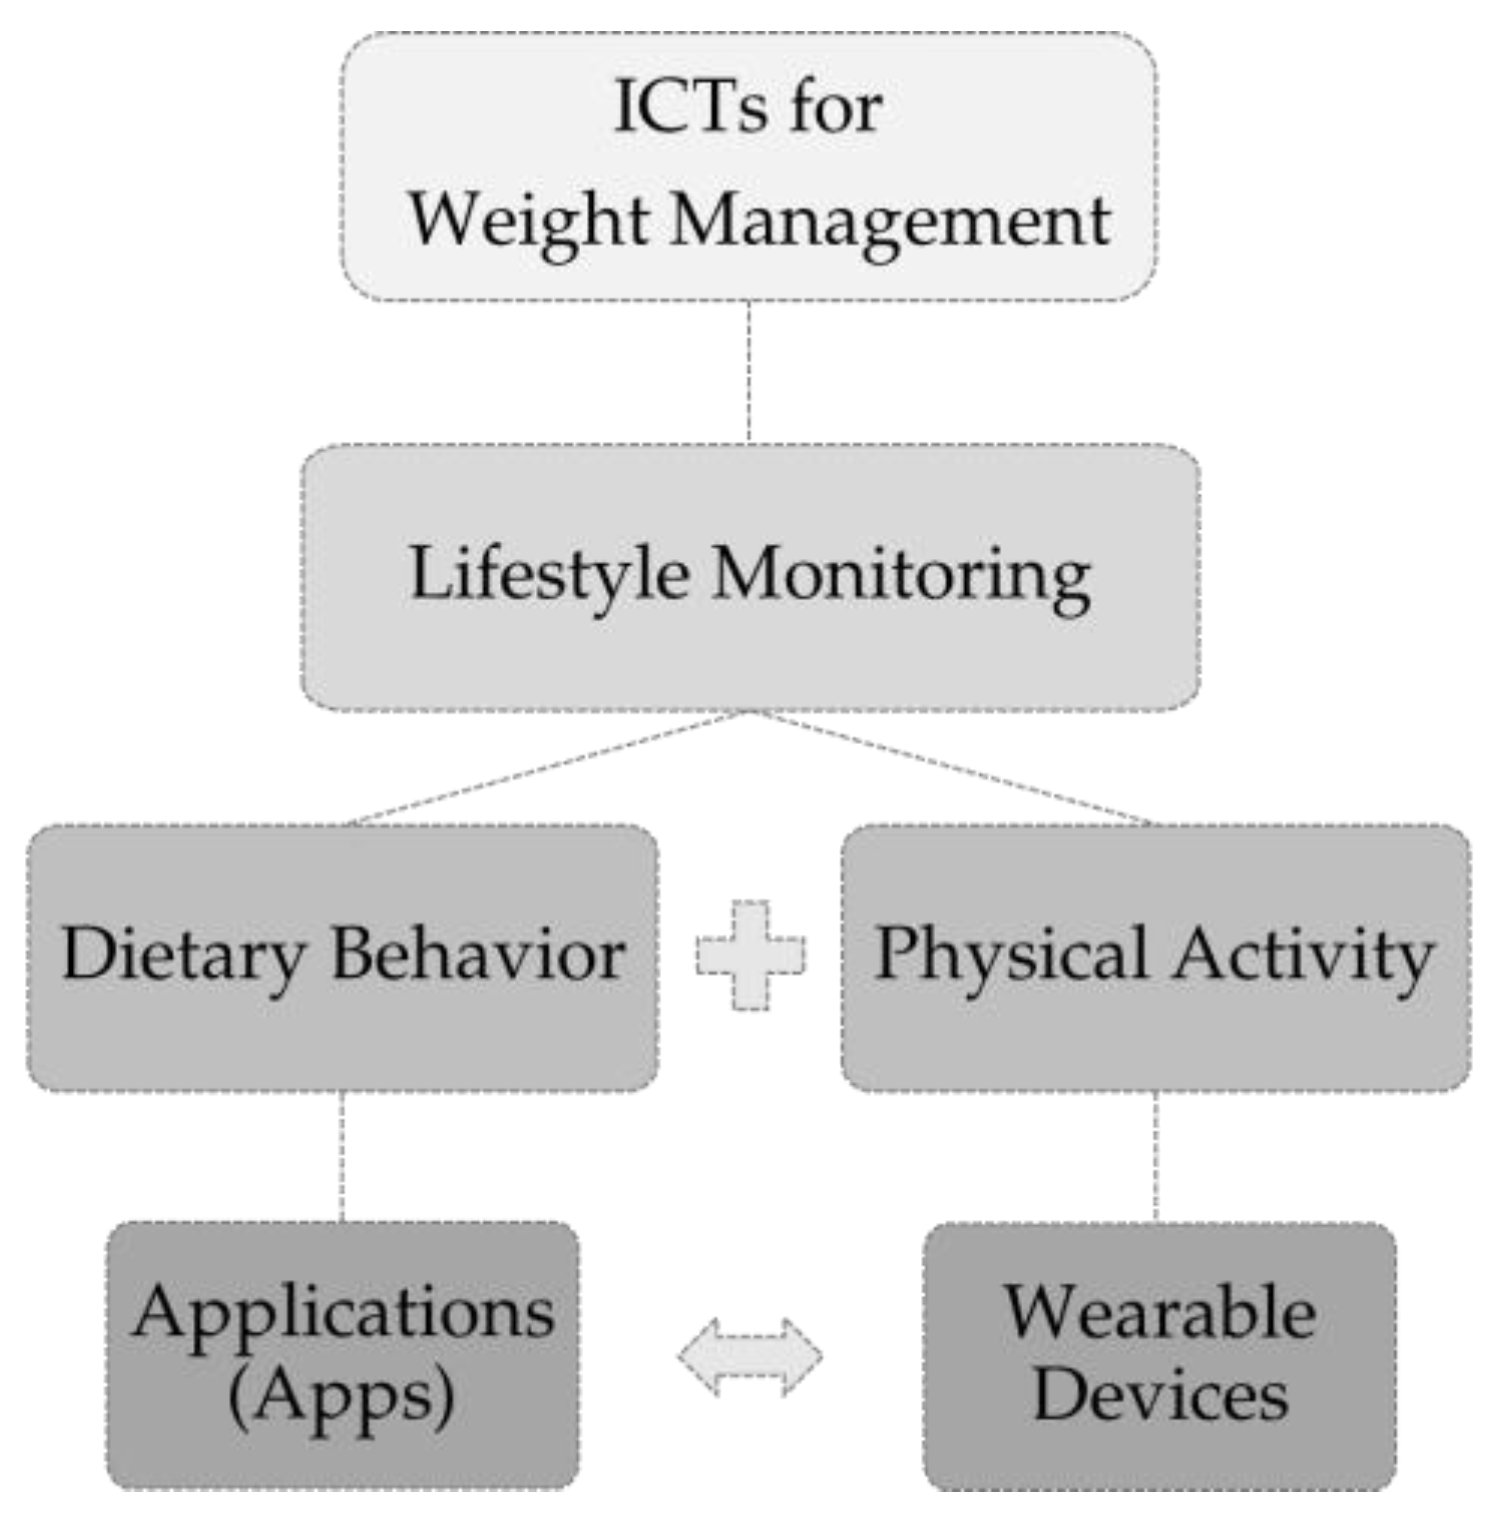 TOOL E3 Measurement and assessment of overweight and obesity